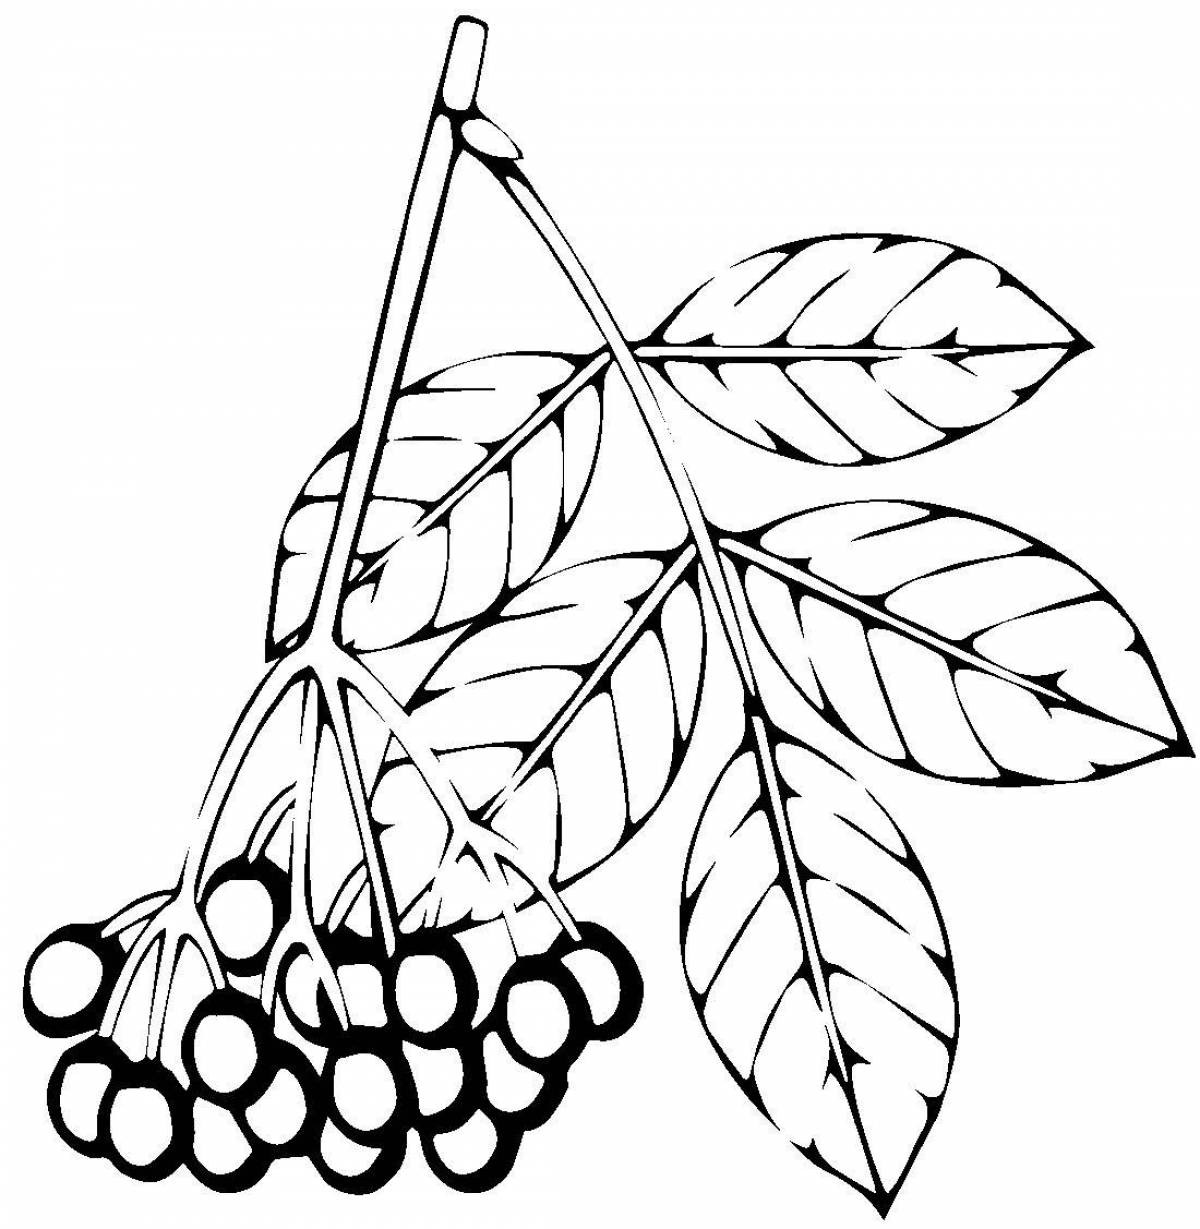 Colorful rowan coloring page